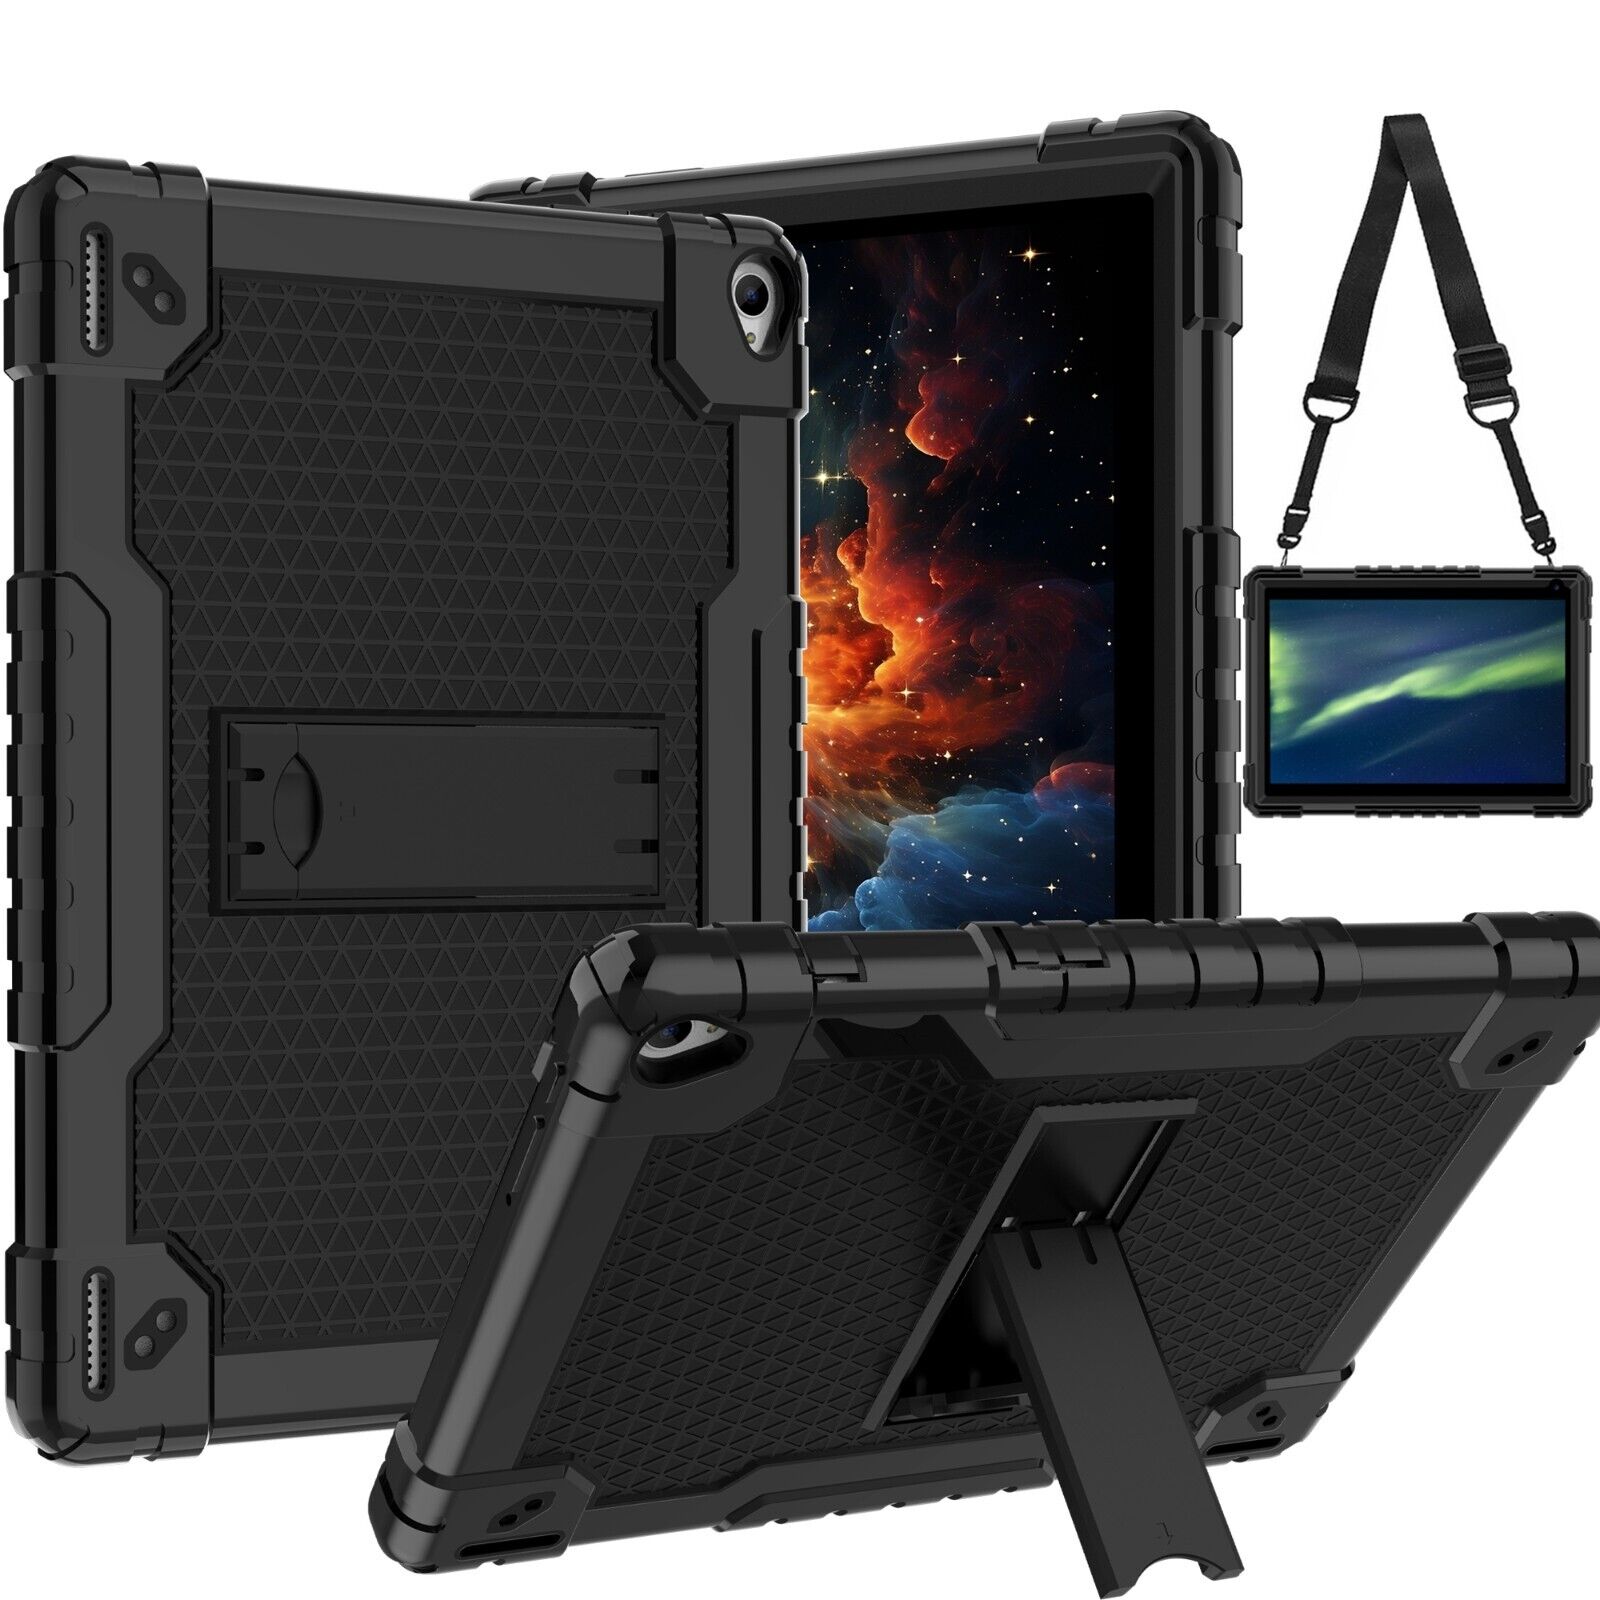 For YQSAVIOR Android Tablets 10 inch Model CP 10 / Coopers Tab CP10 Hybrid Case